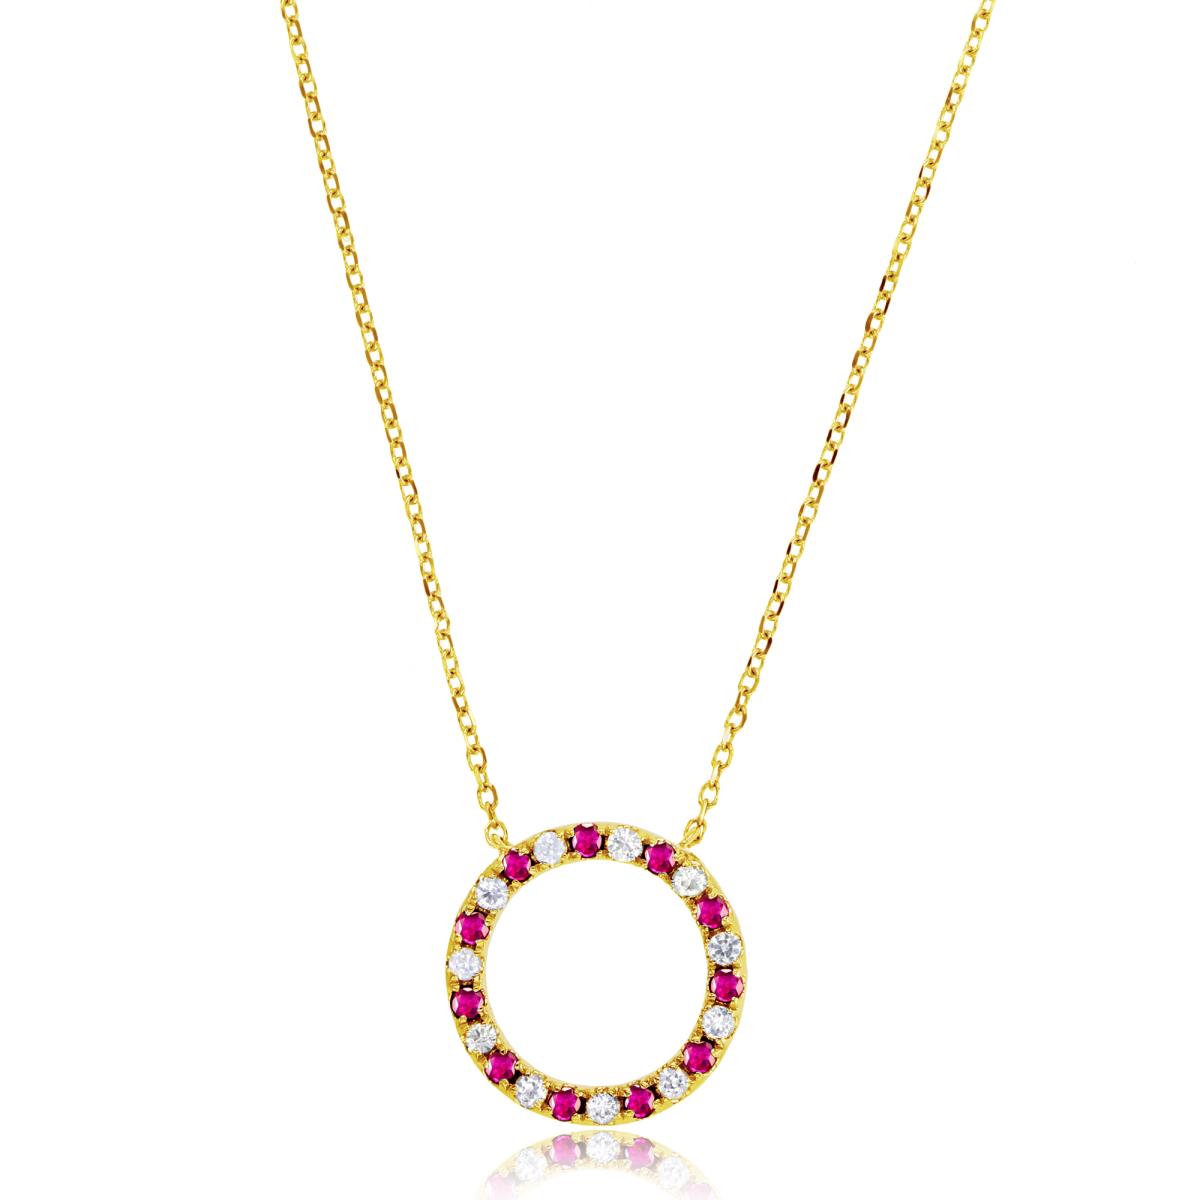 14K Yellow Gold 1.5mm Rnd Ruby & White Sapphire Open Circle 18" Necklace